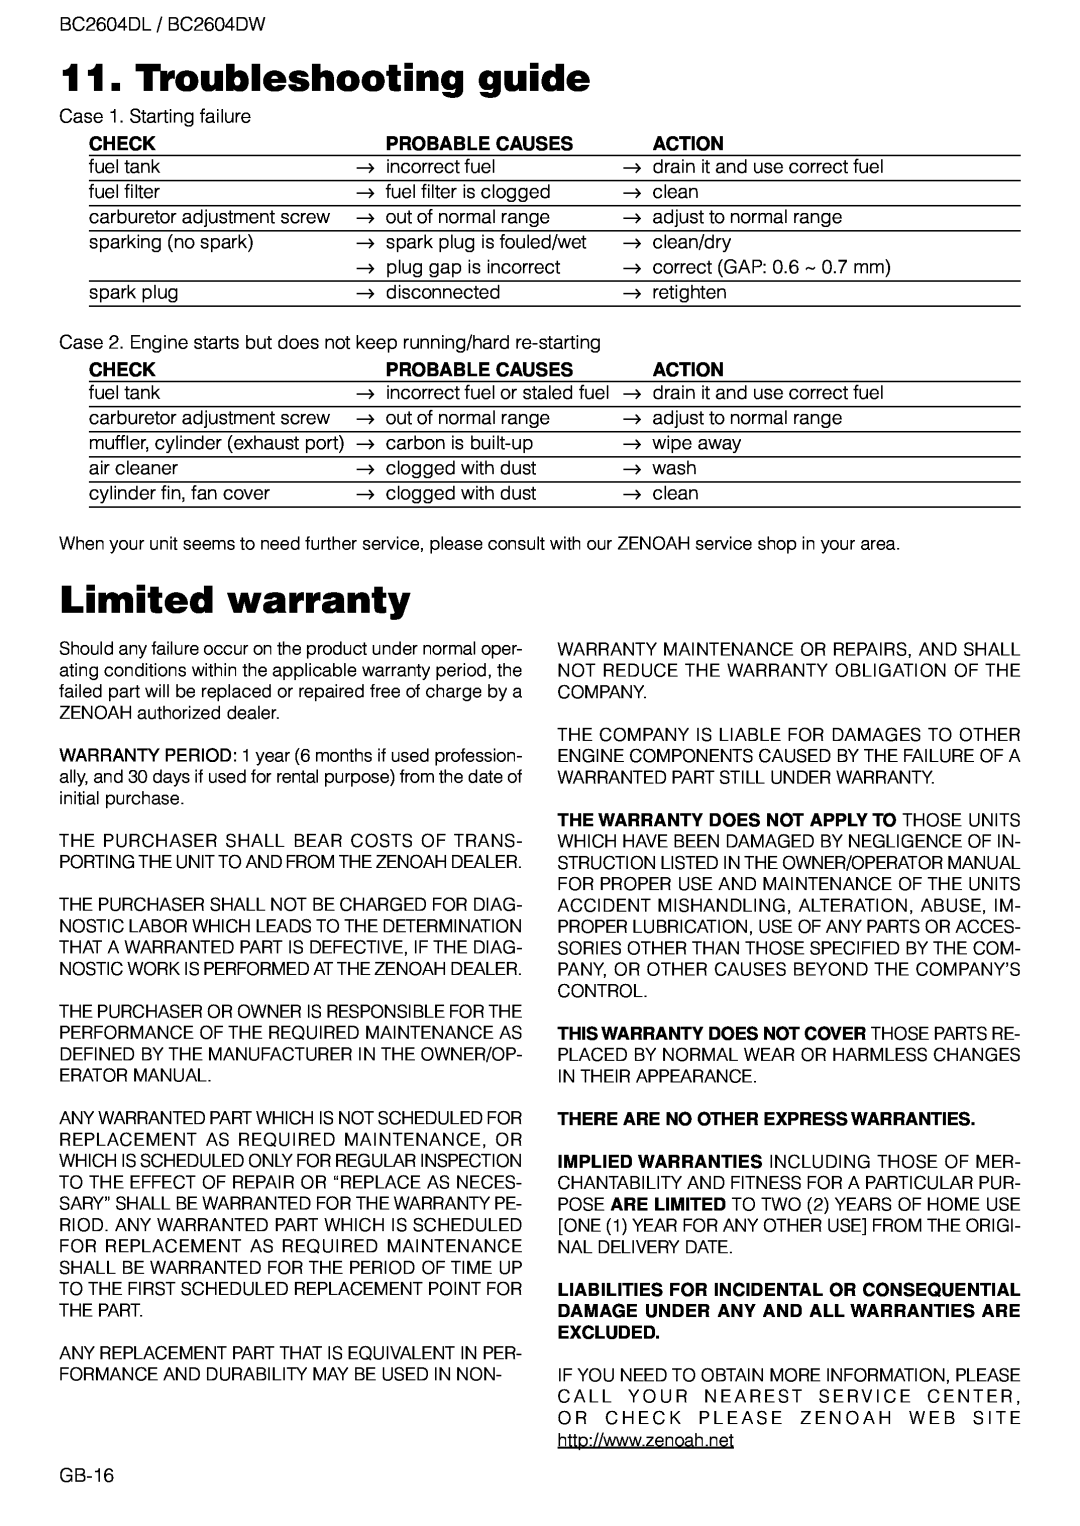 Zenoah BC2604DW, BC2604DL owner manual Troubleshooting guide, Limited warranty, Check, Probable Causes, Action 